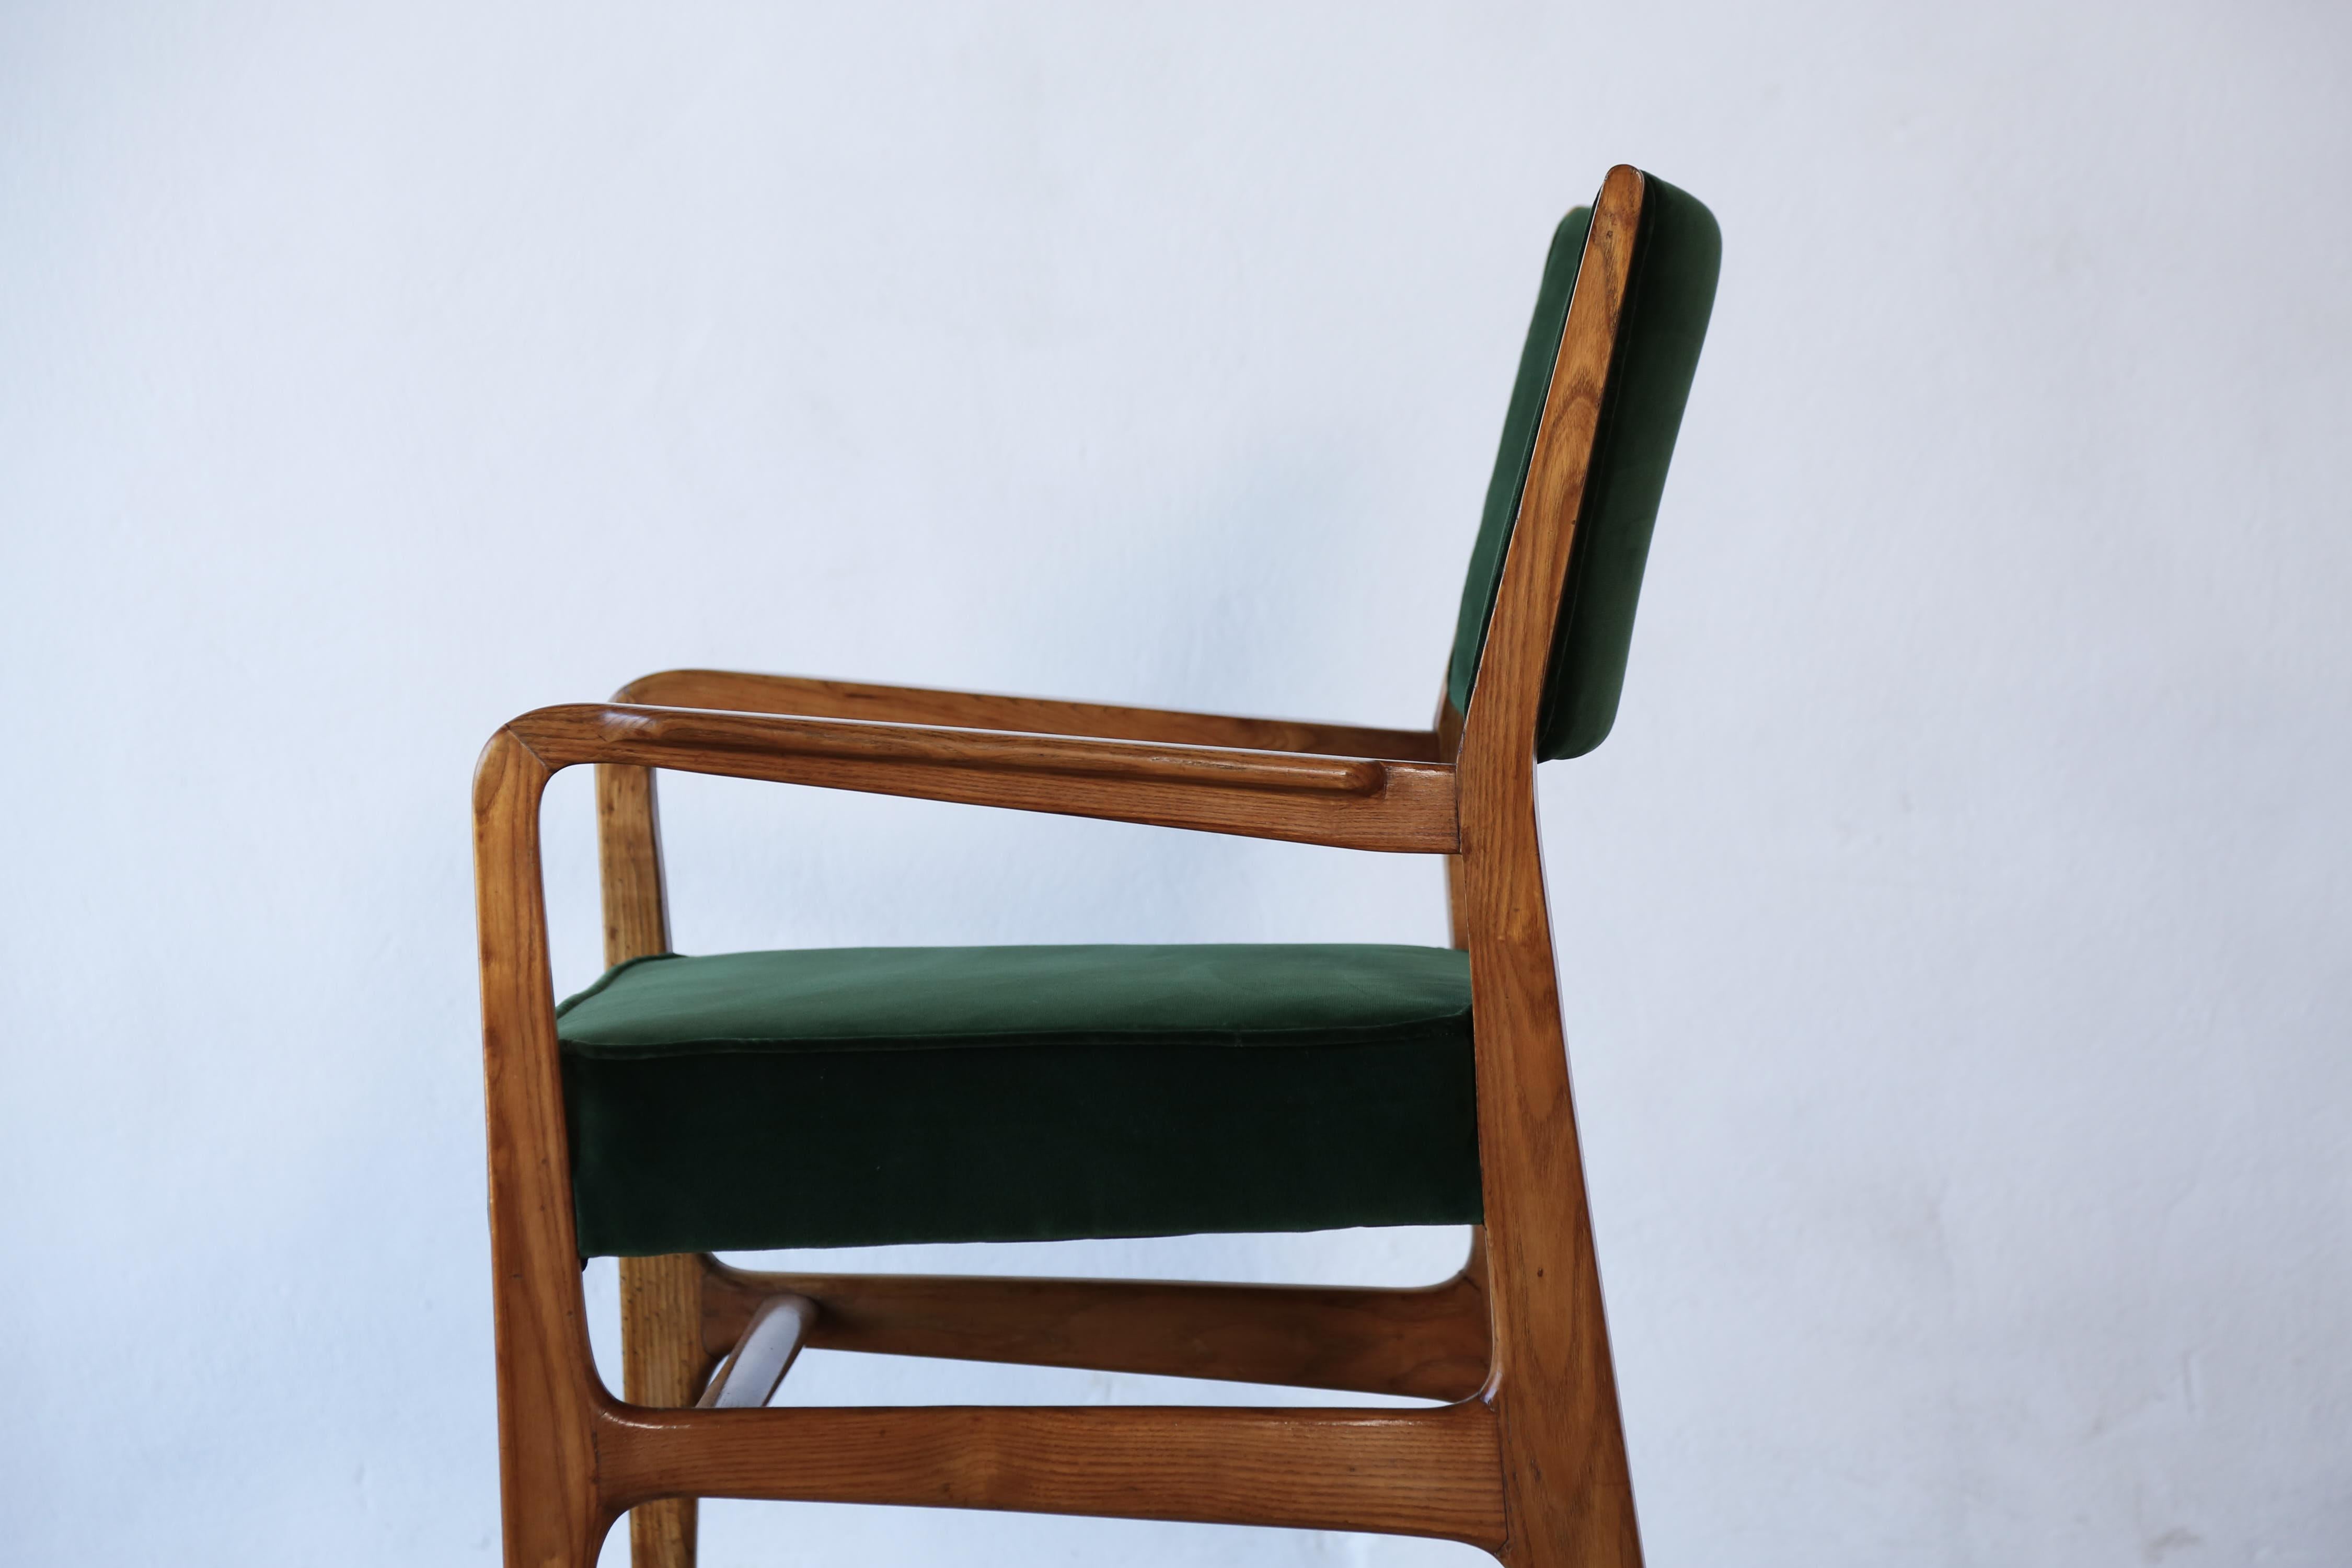 Rare Early Gio Ponti Chair, Giordano Chiesa, Italy, 1950s For Sale 12